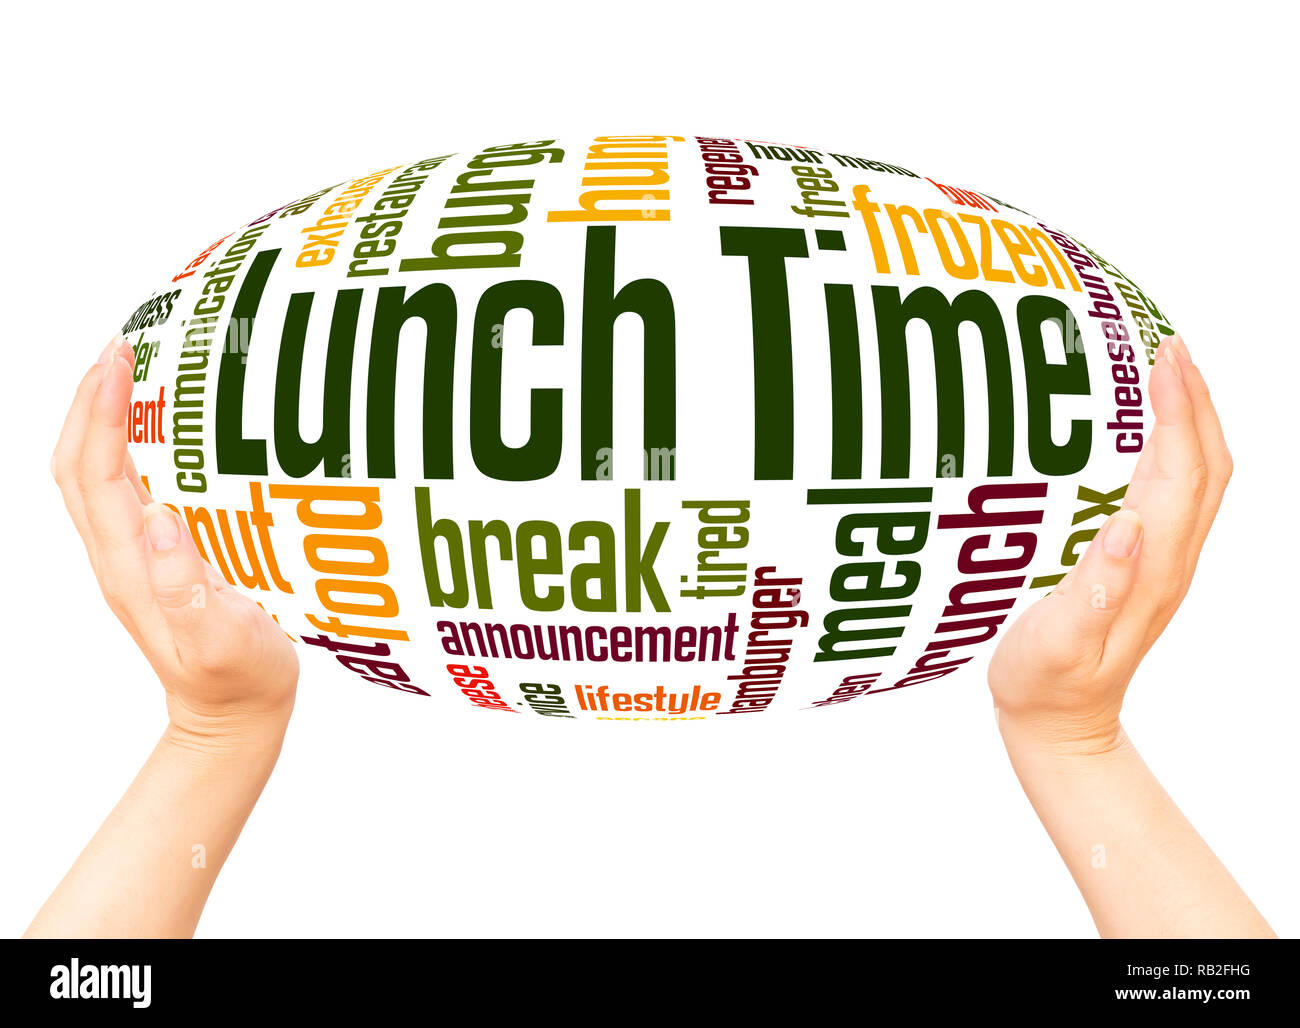 Lunch Time word cloud hand writing concept on white background. Stock Photo